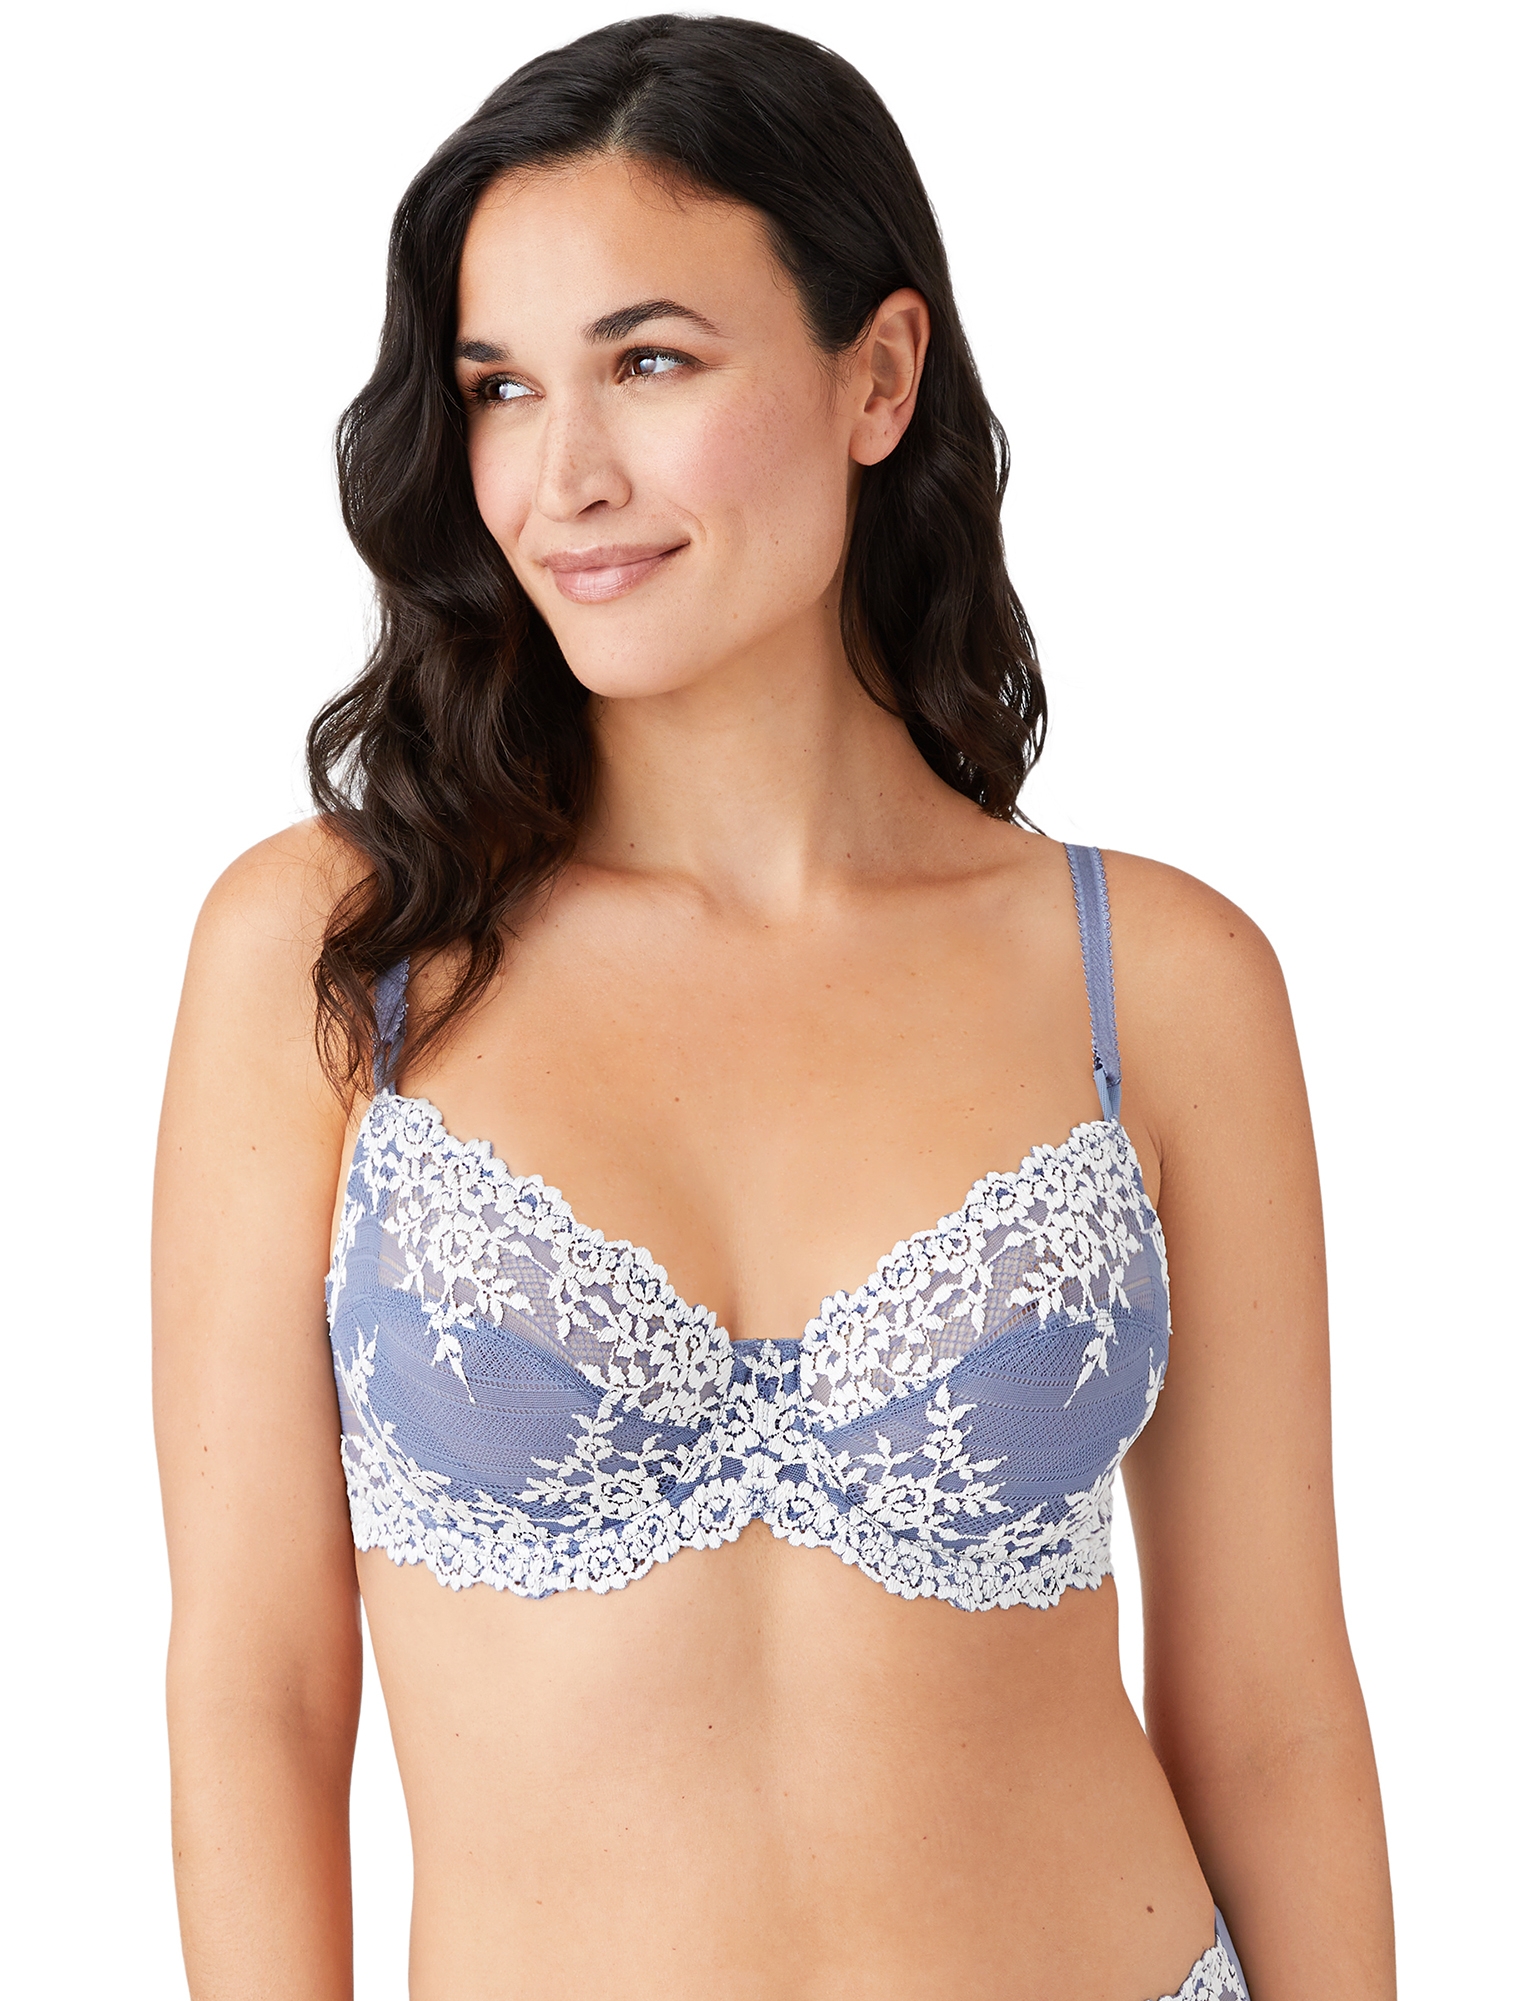 Wacoal, Intimates & Sleepwear, Wacoal 38c 85391 Embrace Lace Underwire Tshirt  Bra Floral Embroidered Lace